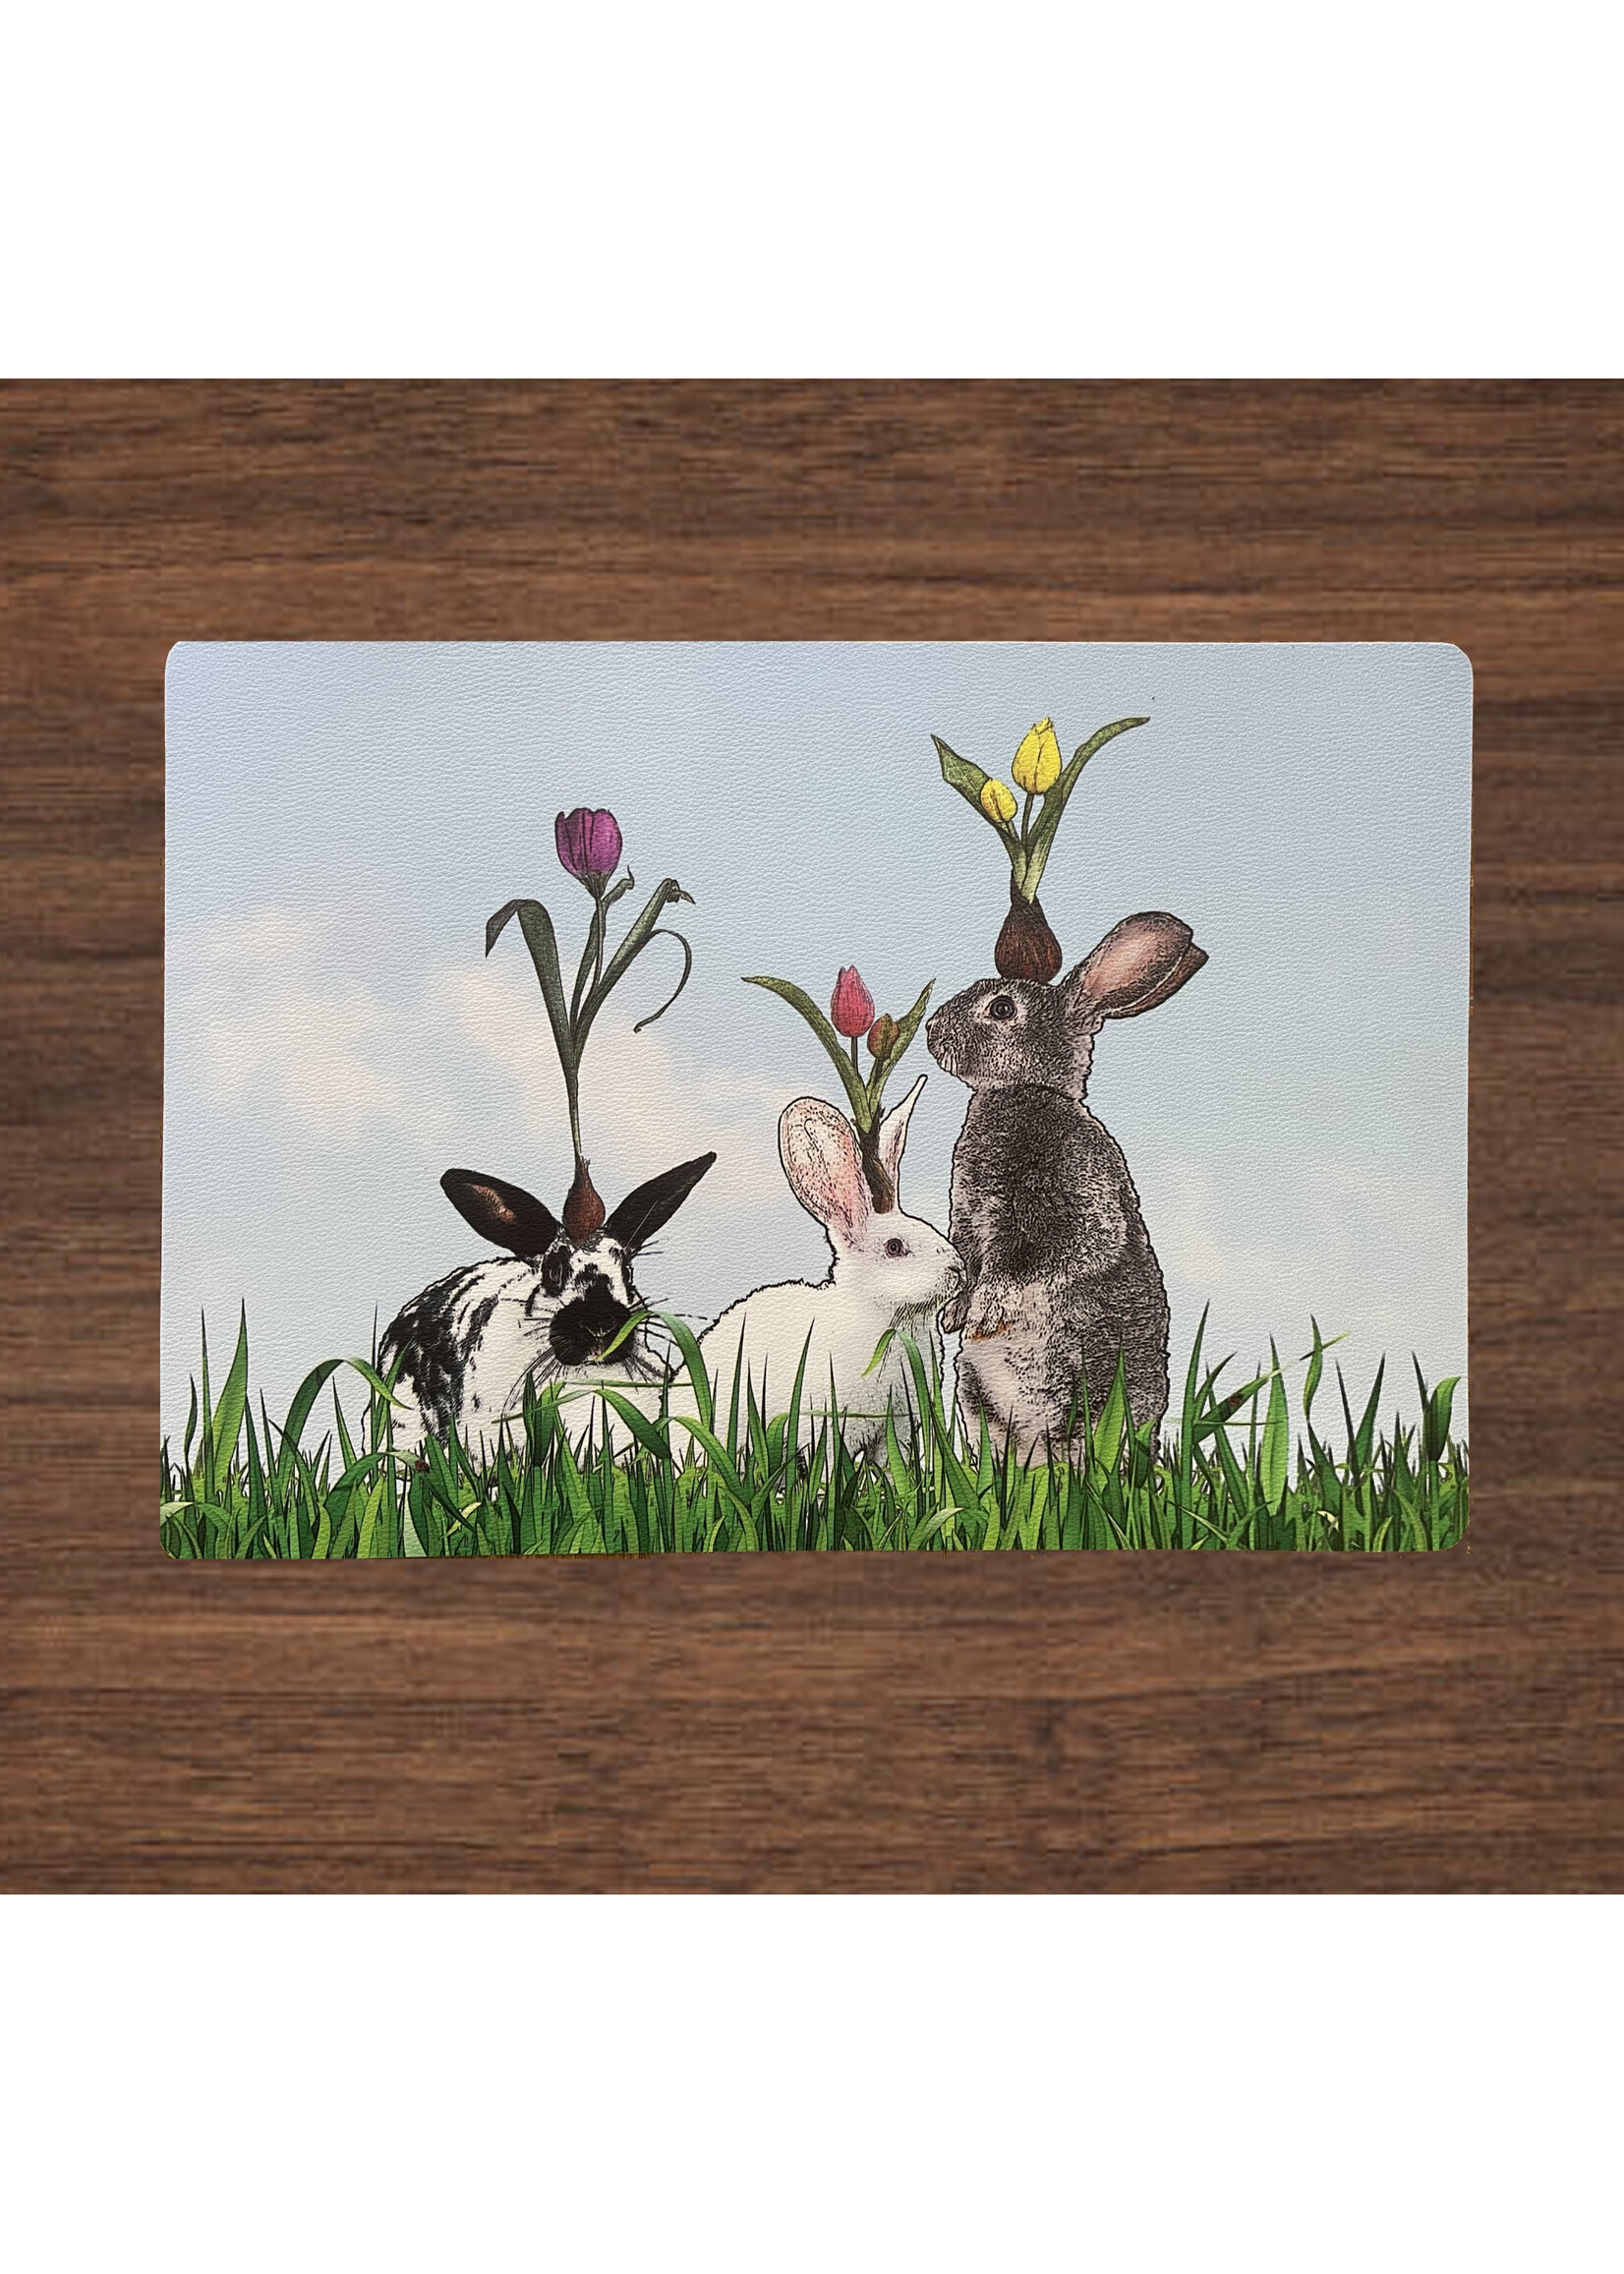 Alphie and Ollie bunnies with tulips vinyl placemat 12 x 17 inches